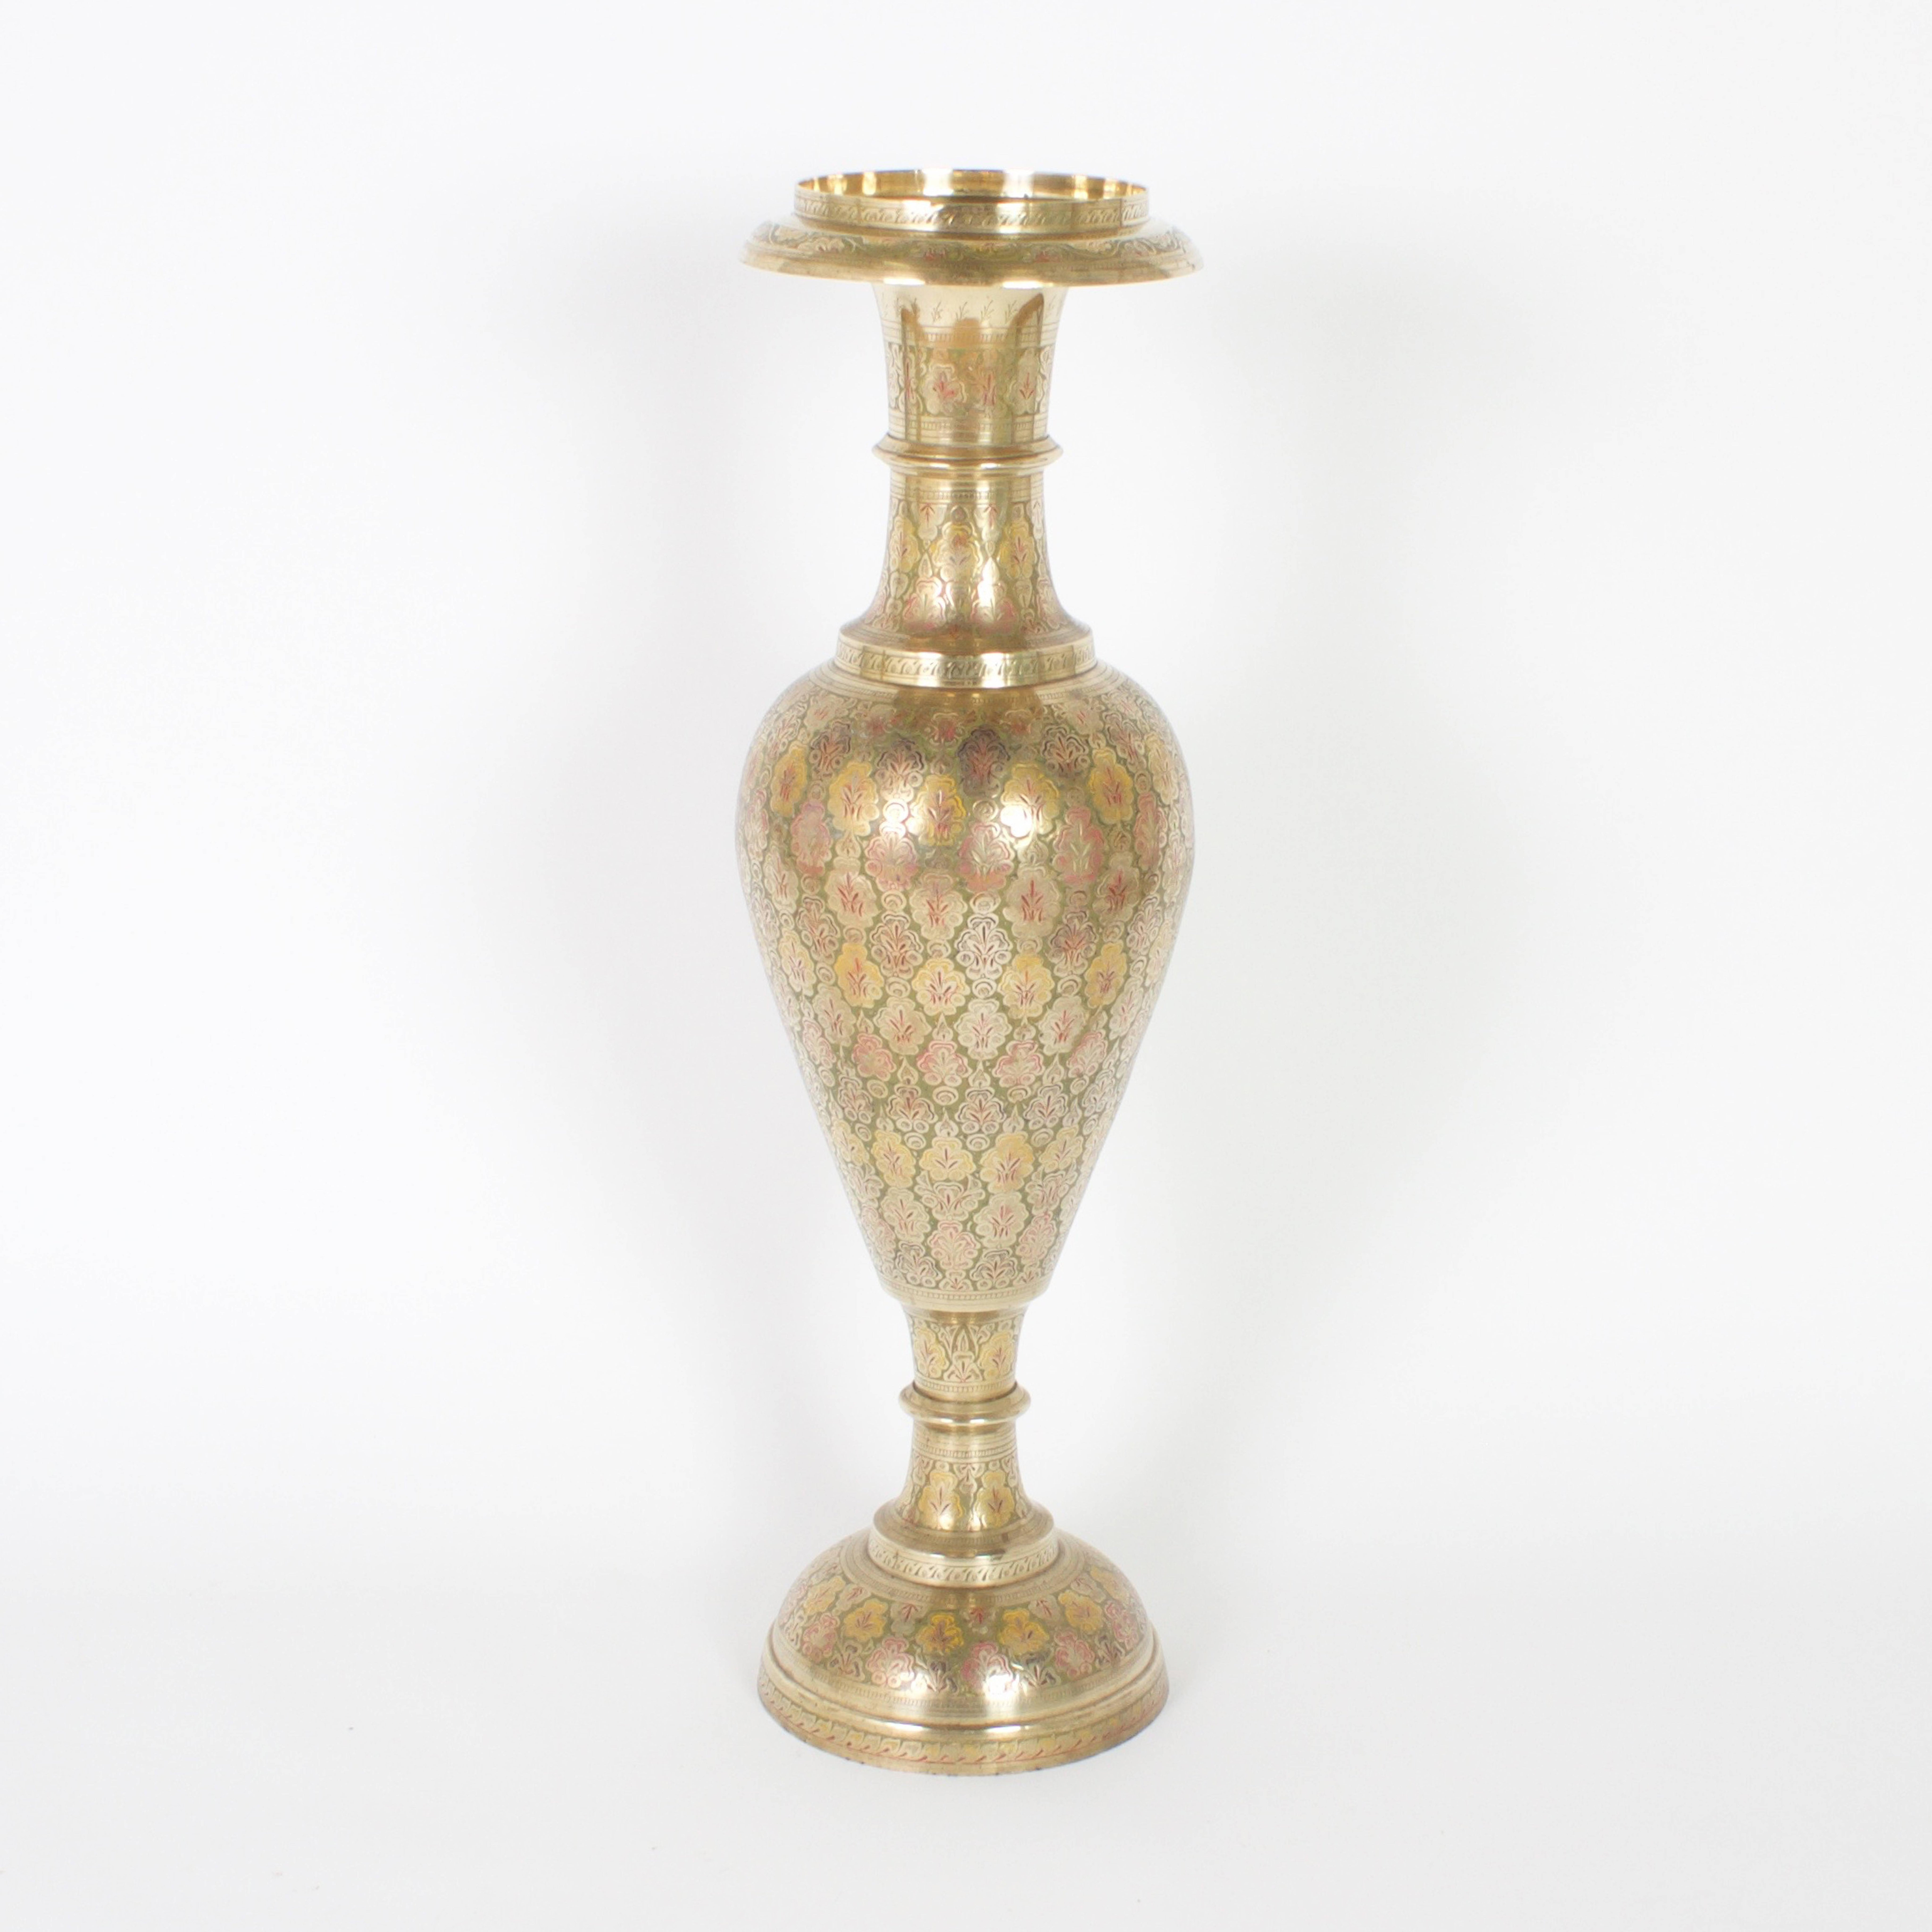 Pair of Mid-Century palatial Indian brass urns or stands with Classic form and a brilliant combination of engraving and enamel, in the champlevé manner. Having removable lids which give these exotic works of art the duel purposes of either vessels